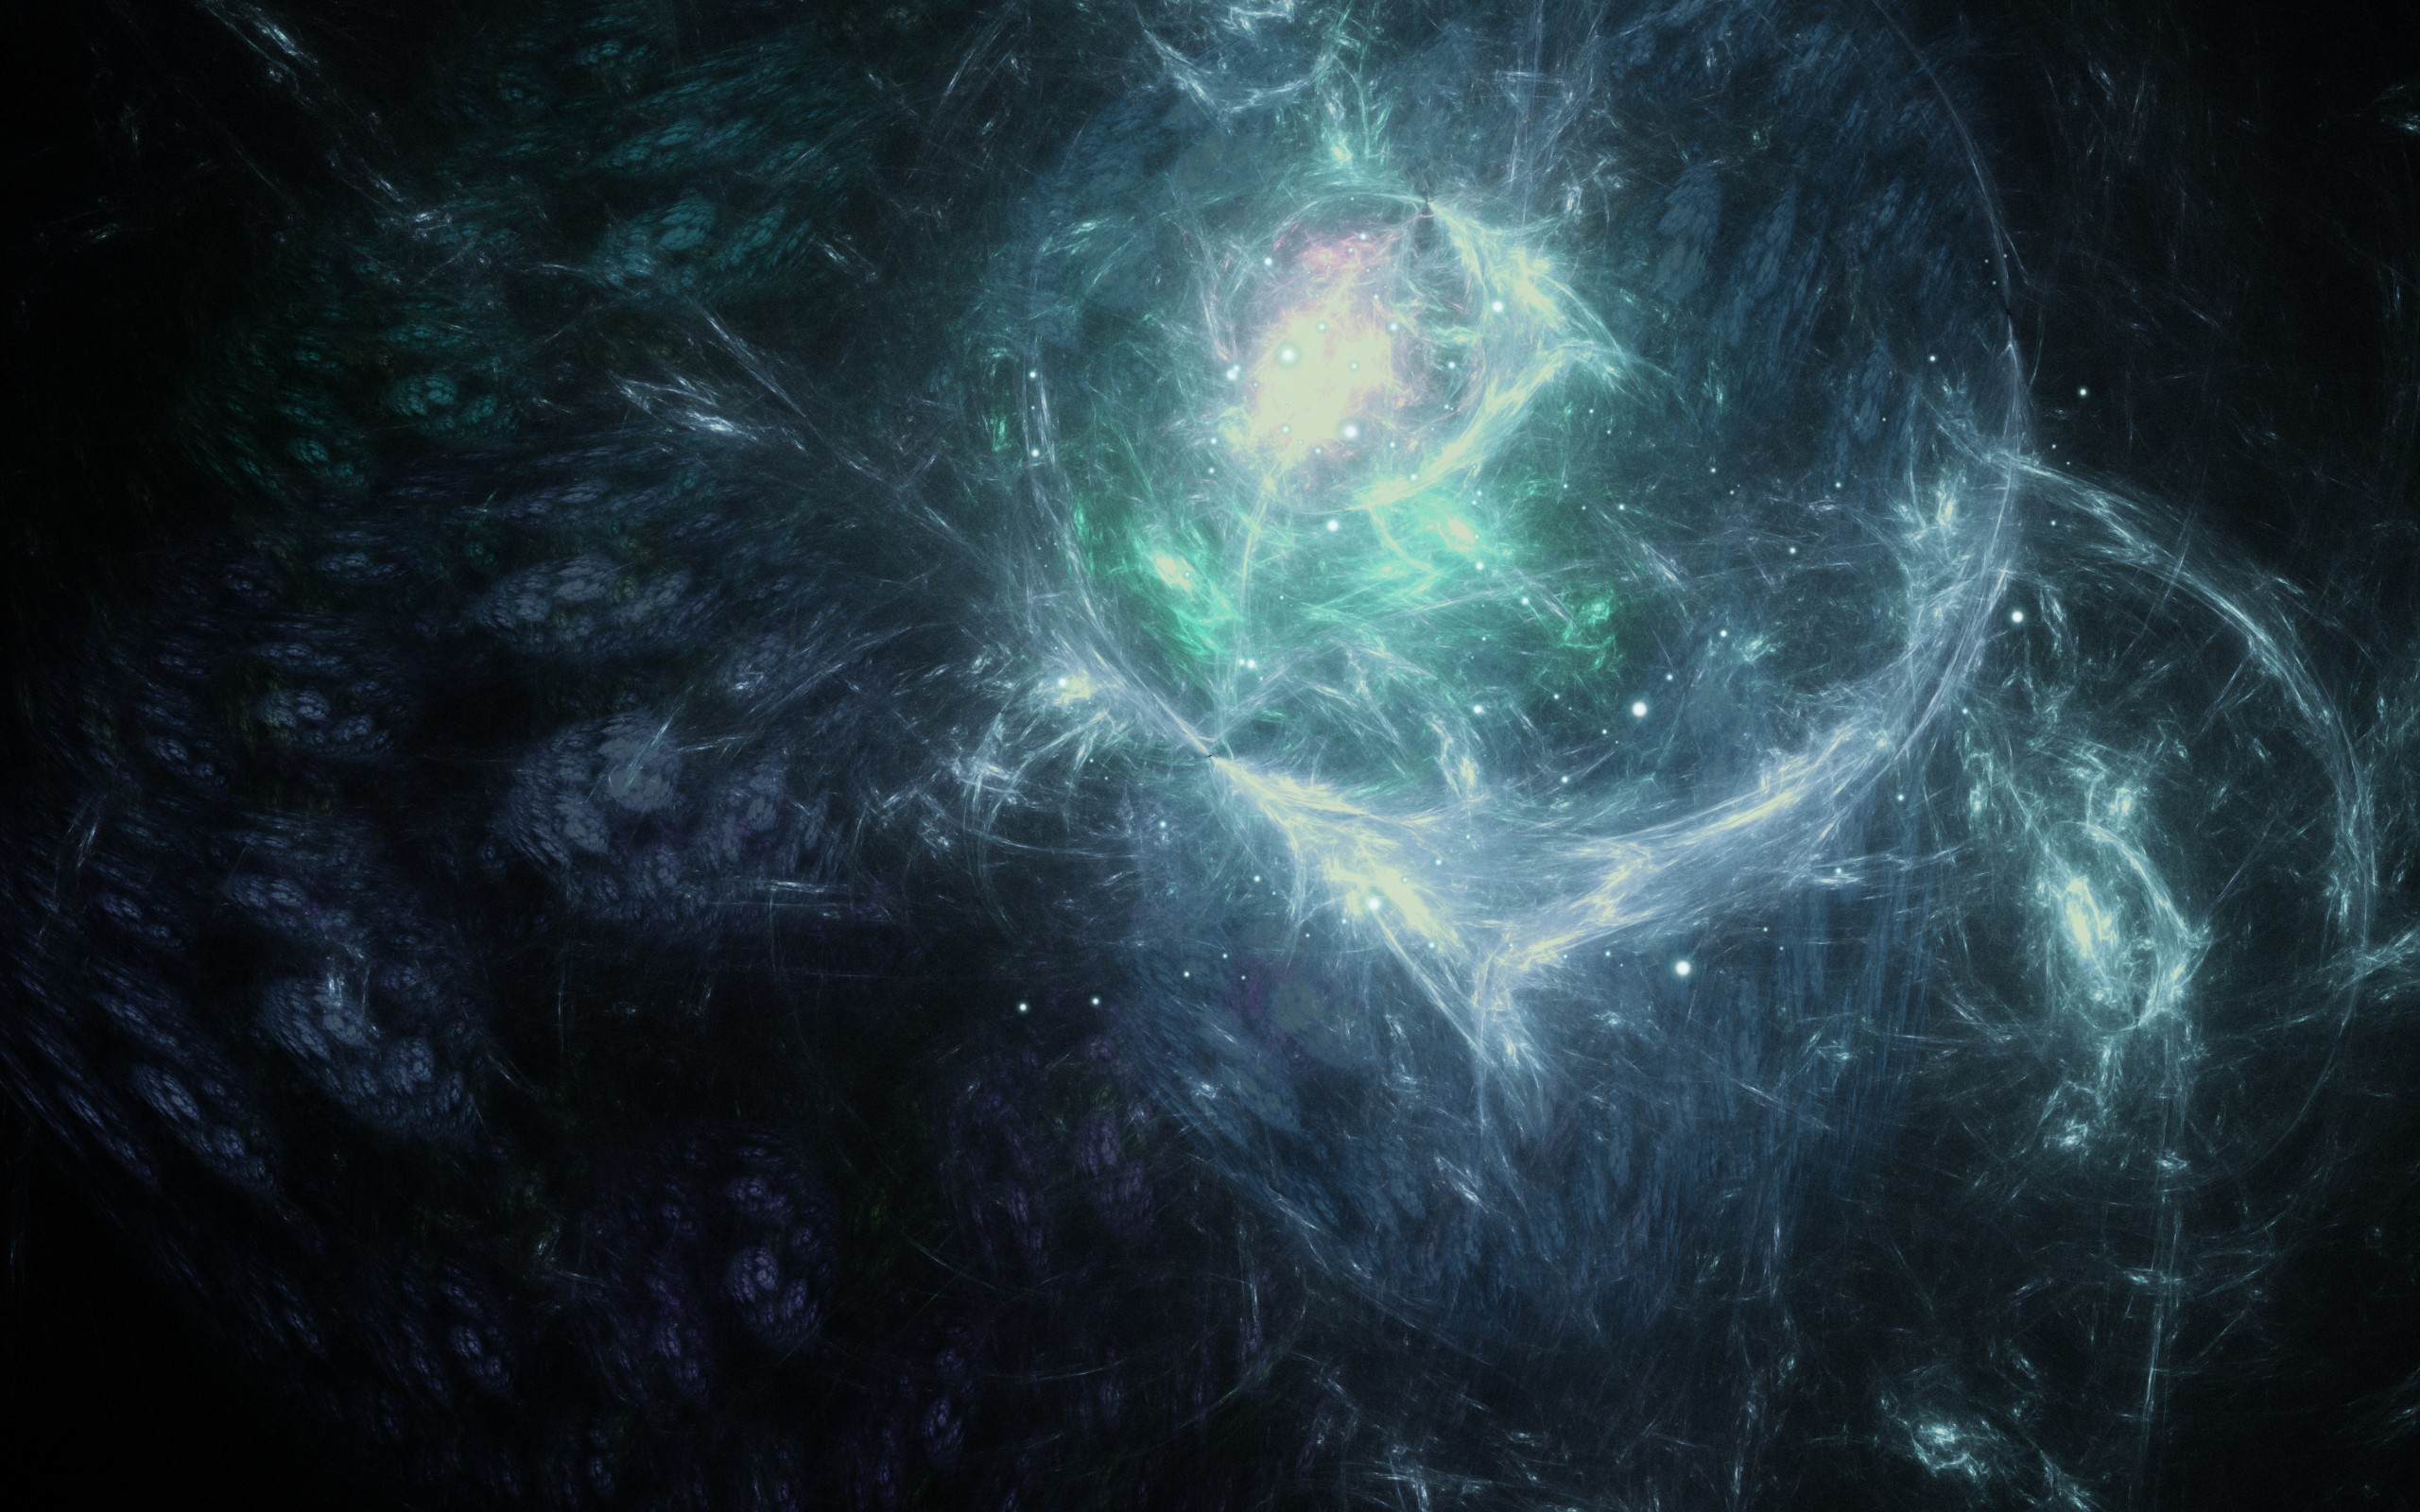 Sci Fi Abstract Wallpaper High Quality Resolution Robot, - Science Fiction Hd Wallpaper Facebook Cover Photo Dirty - HD Wallpaper 